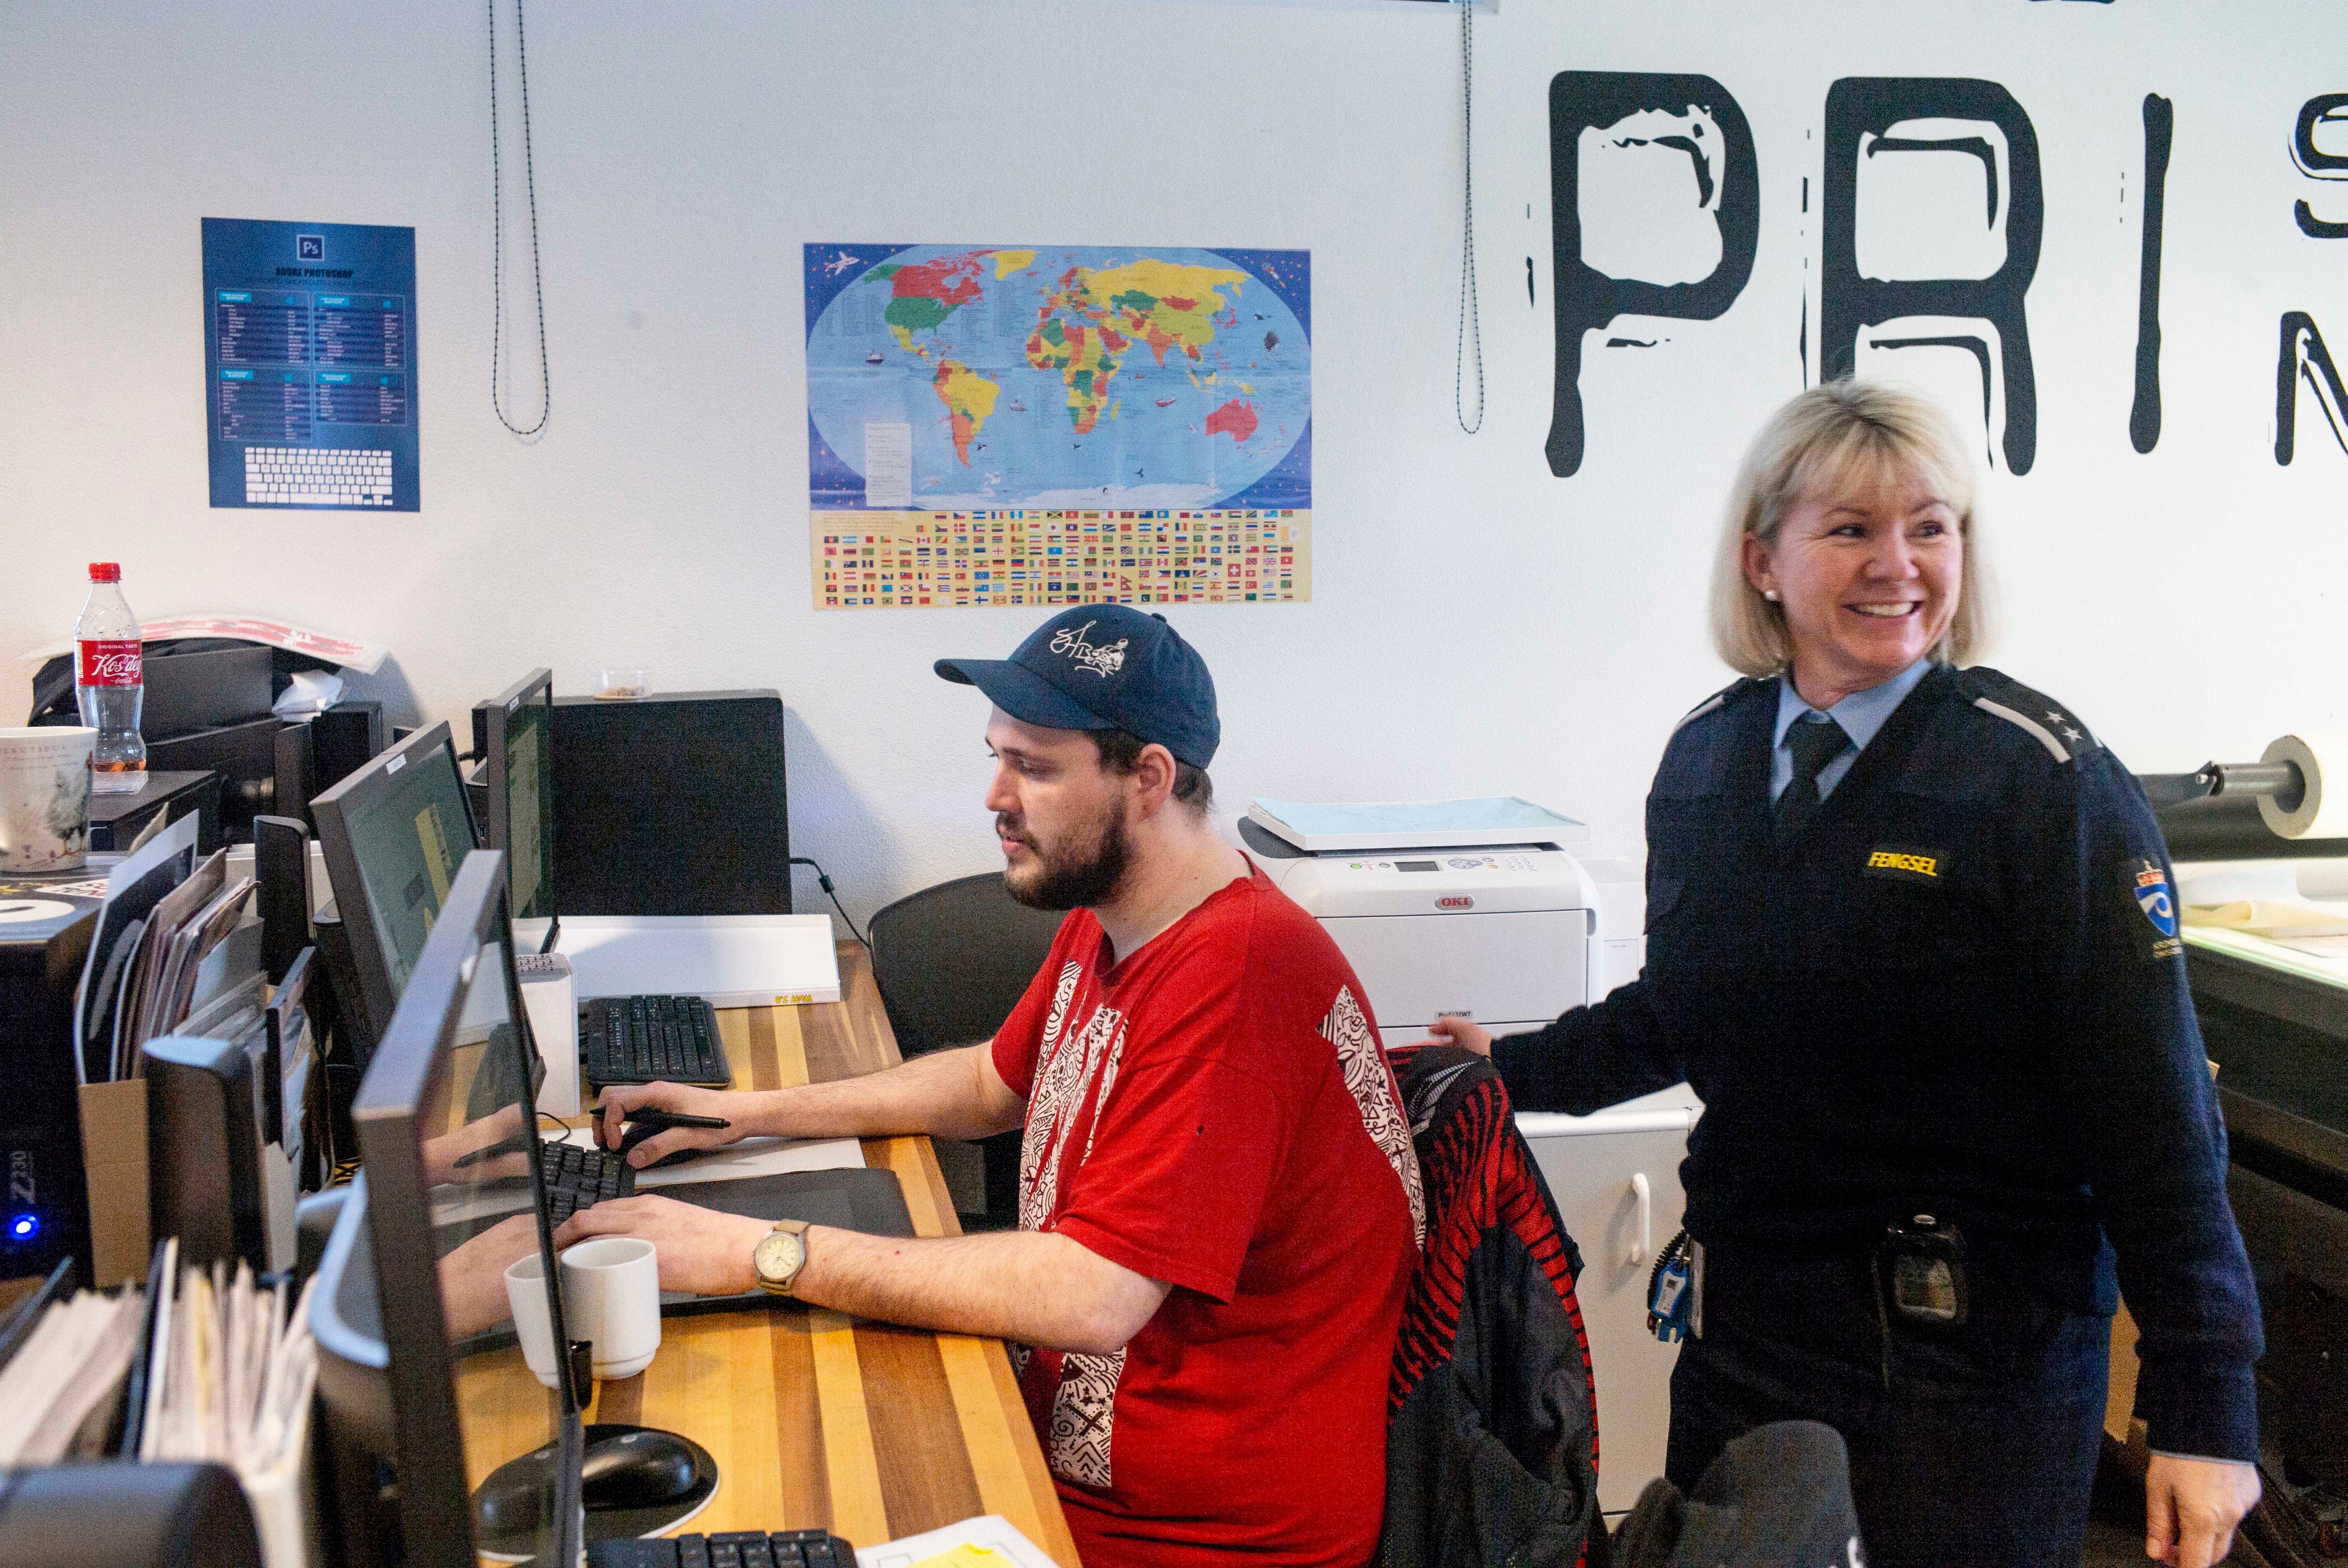 Inmate Fredrik Soerfjordmo designs artwork on a computer, watched by works manager Janne Hasle, in the digital print shop at Halden Prison in Norway. Staff at Halden are not armed. Instead, they practice " dynamic security, " a disciplinary system based on relationship-building, communication and mutual trust.